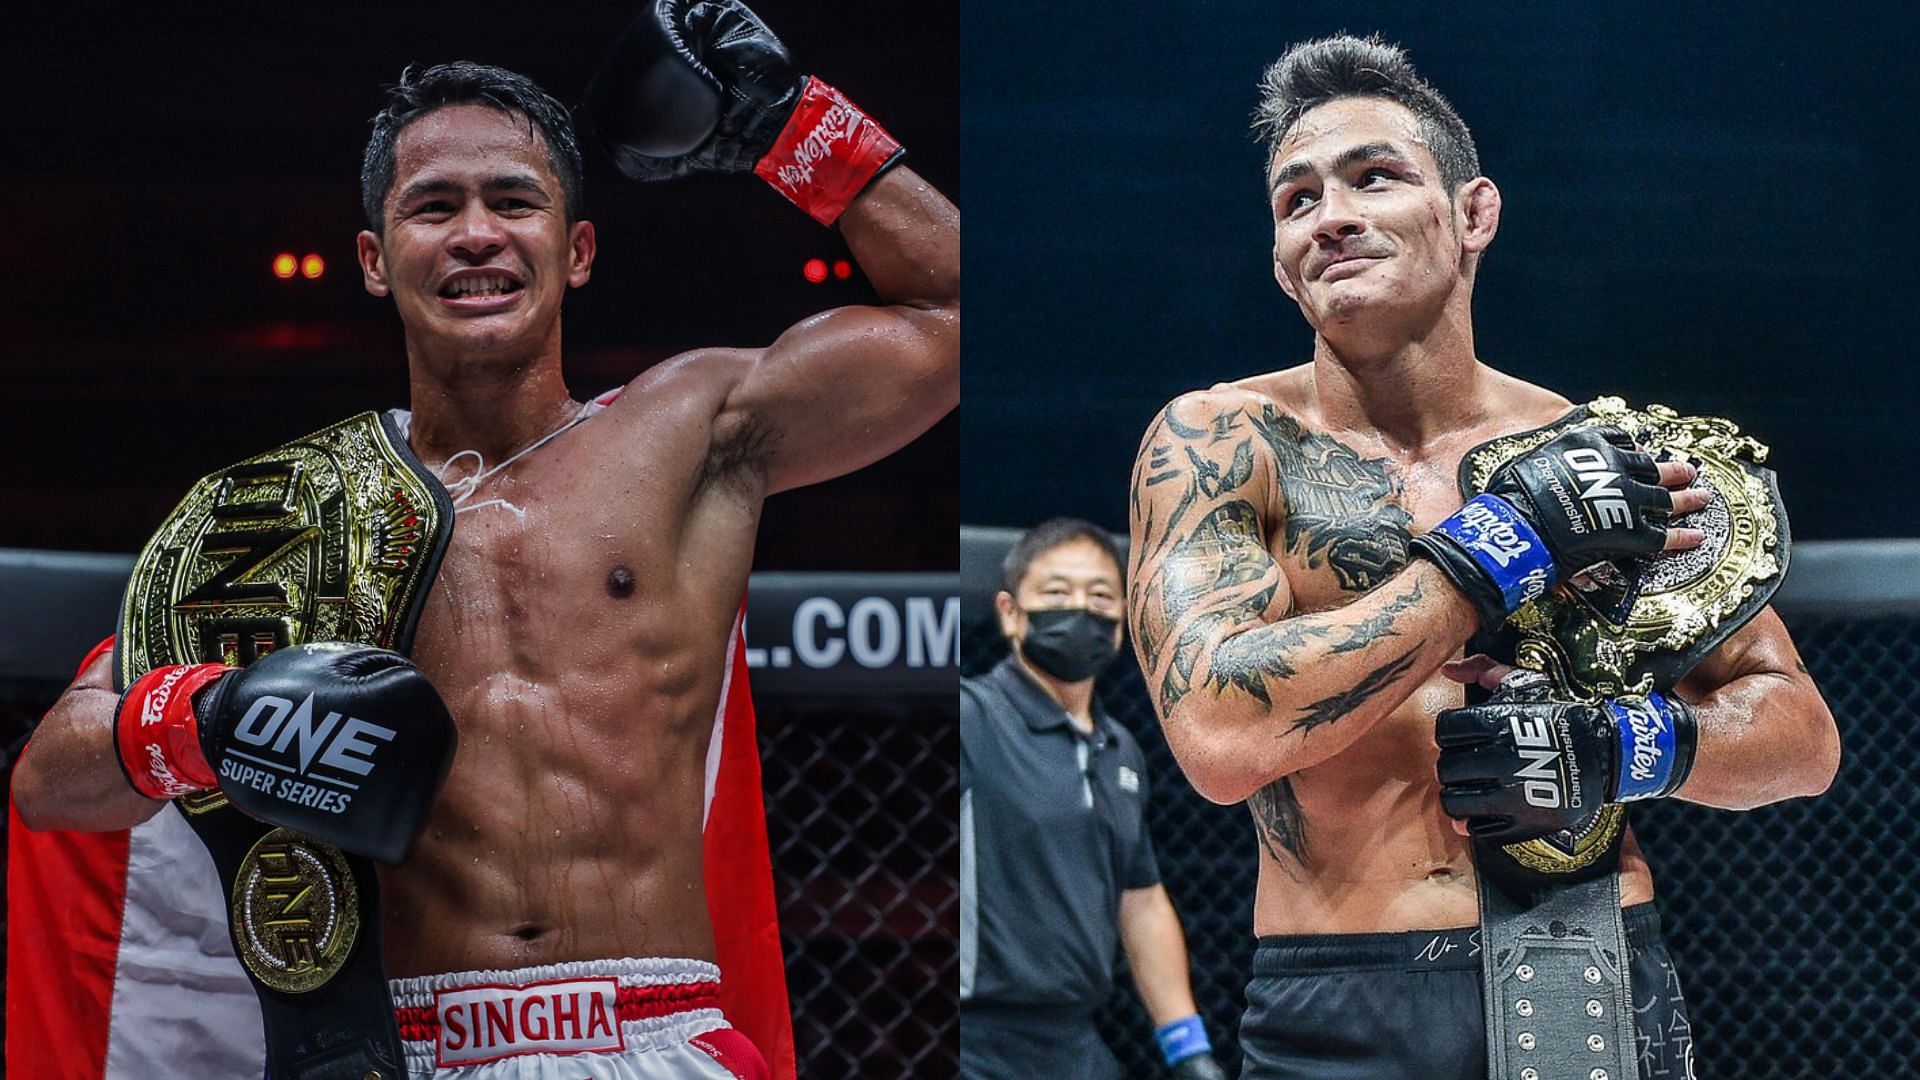 Superbon (left) and Thanh Le (right) [Photo Credits: ONE Championship]